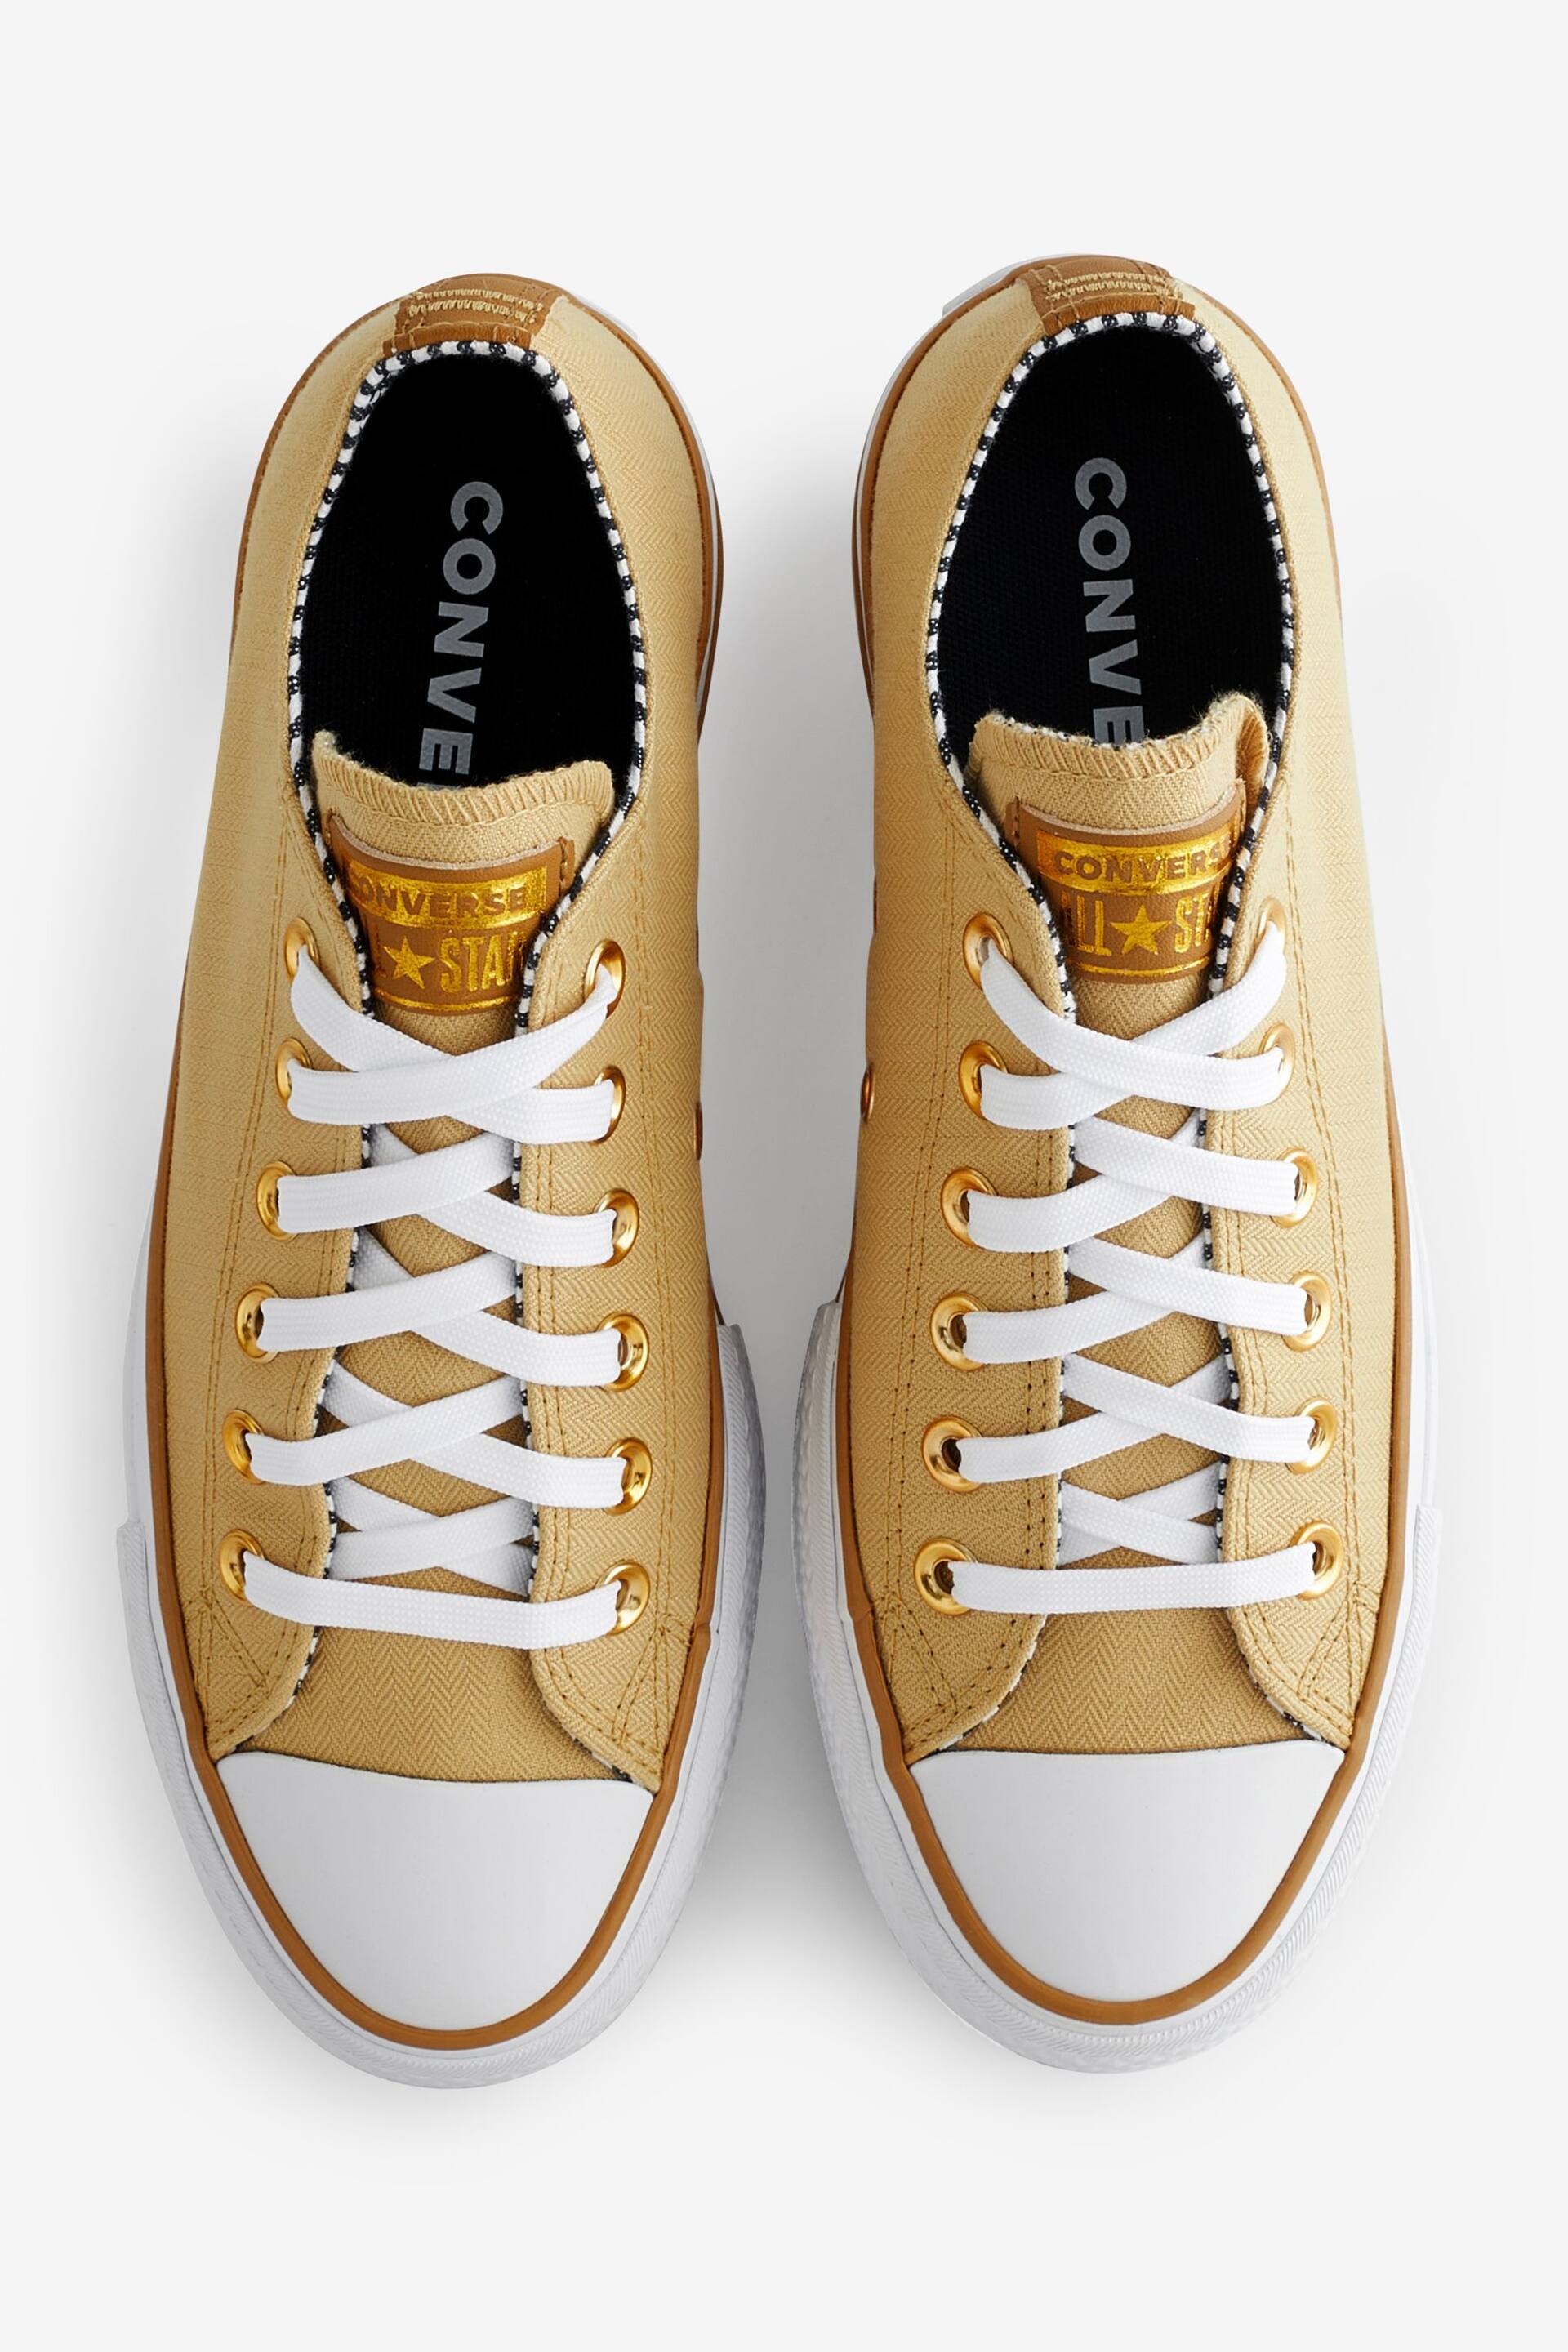 Converse Yellow Lift Chuck Ox Trainers - Image 5 of 9